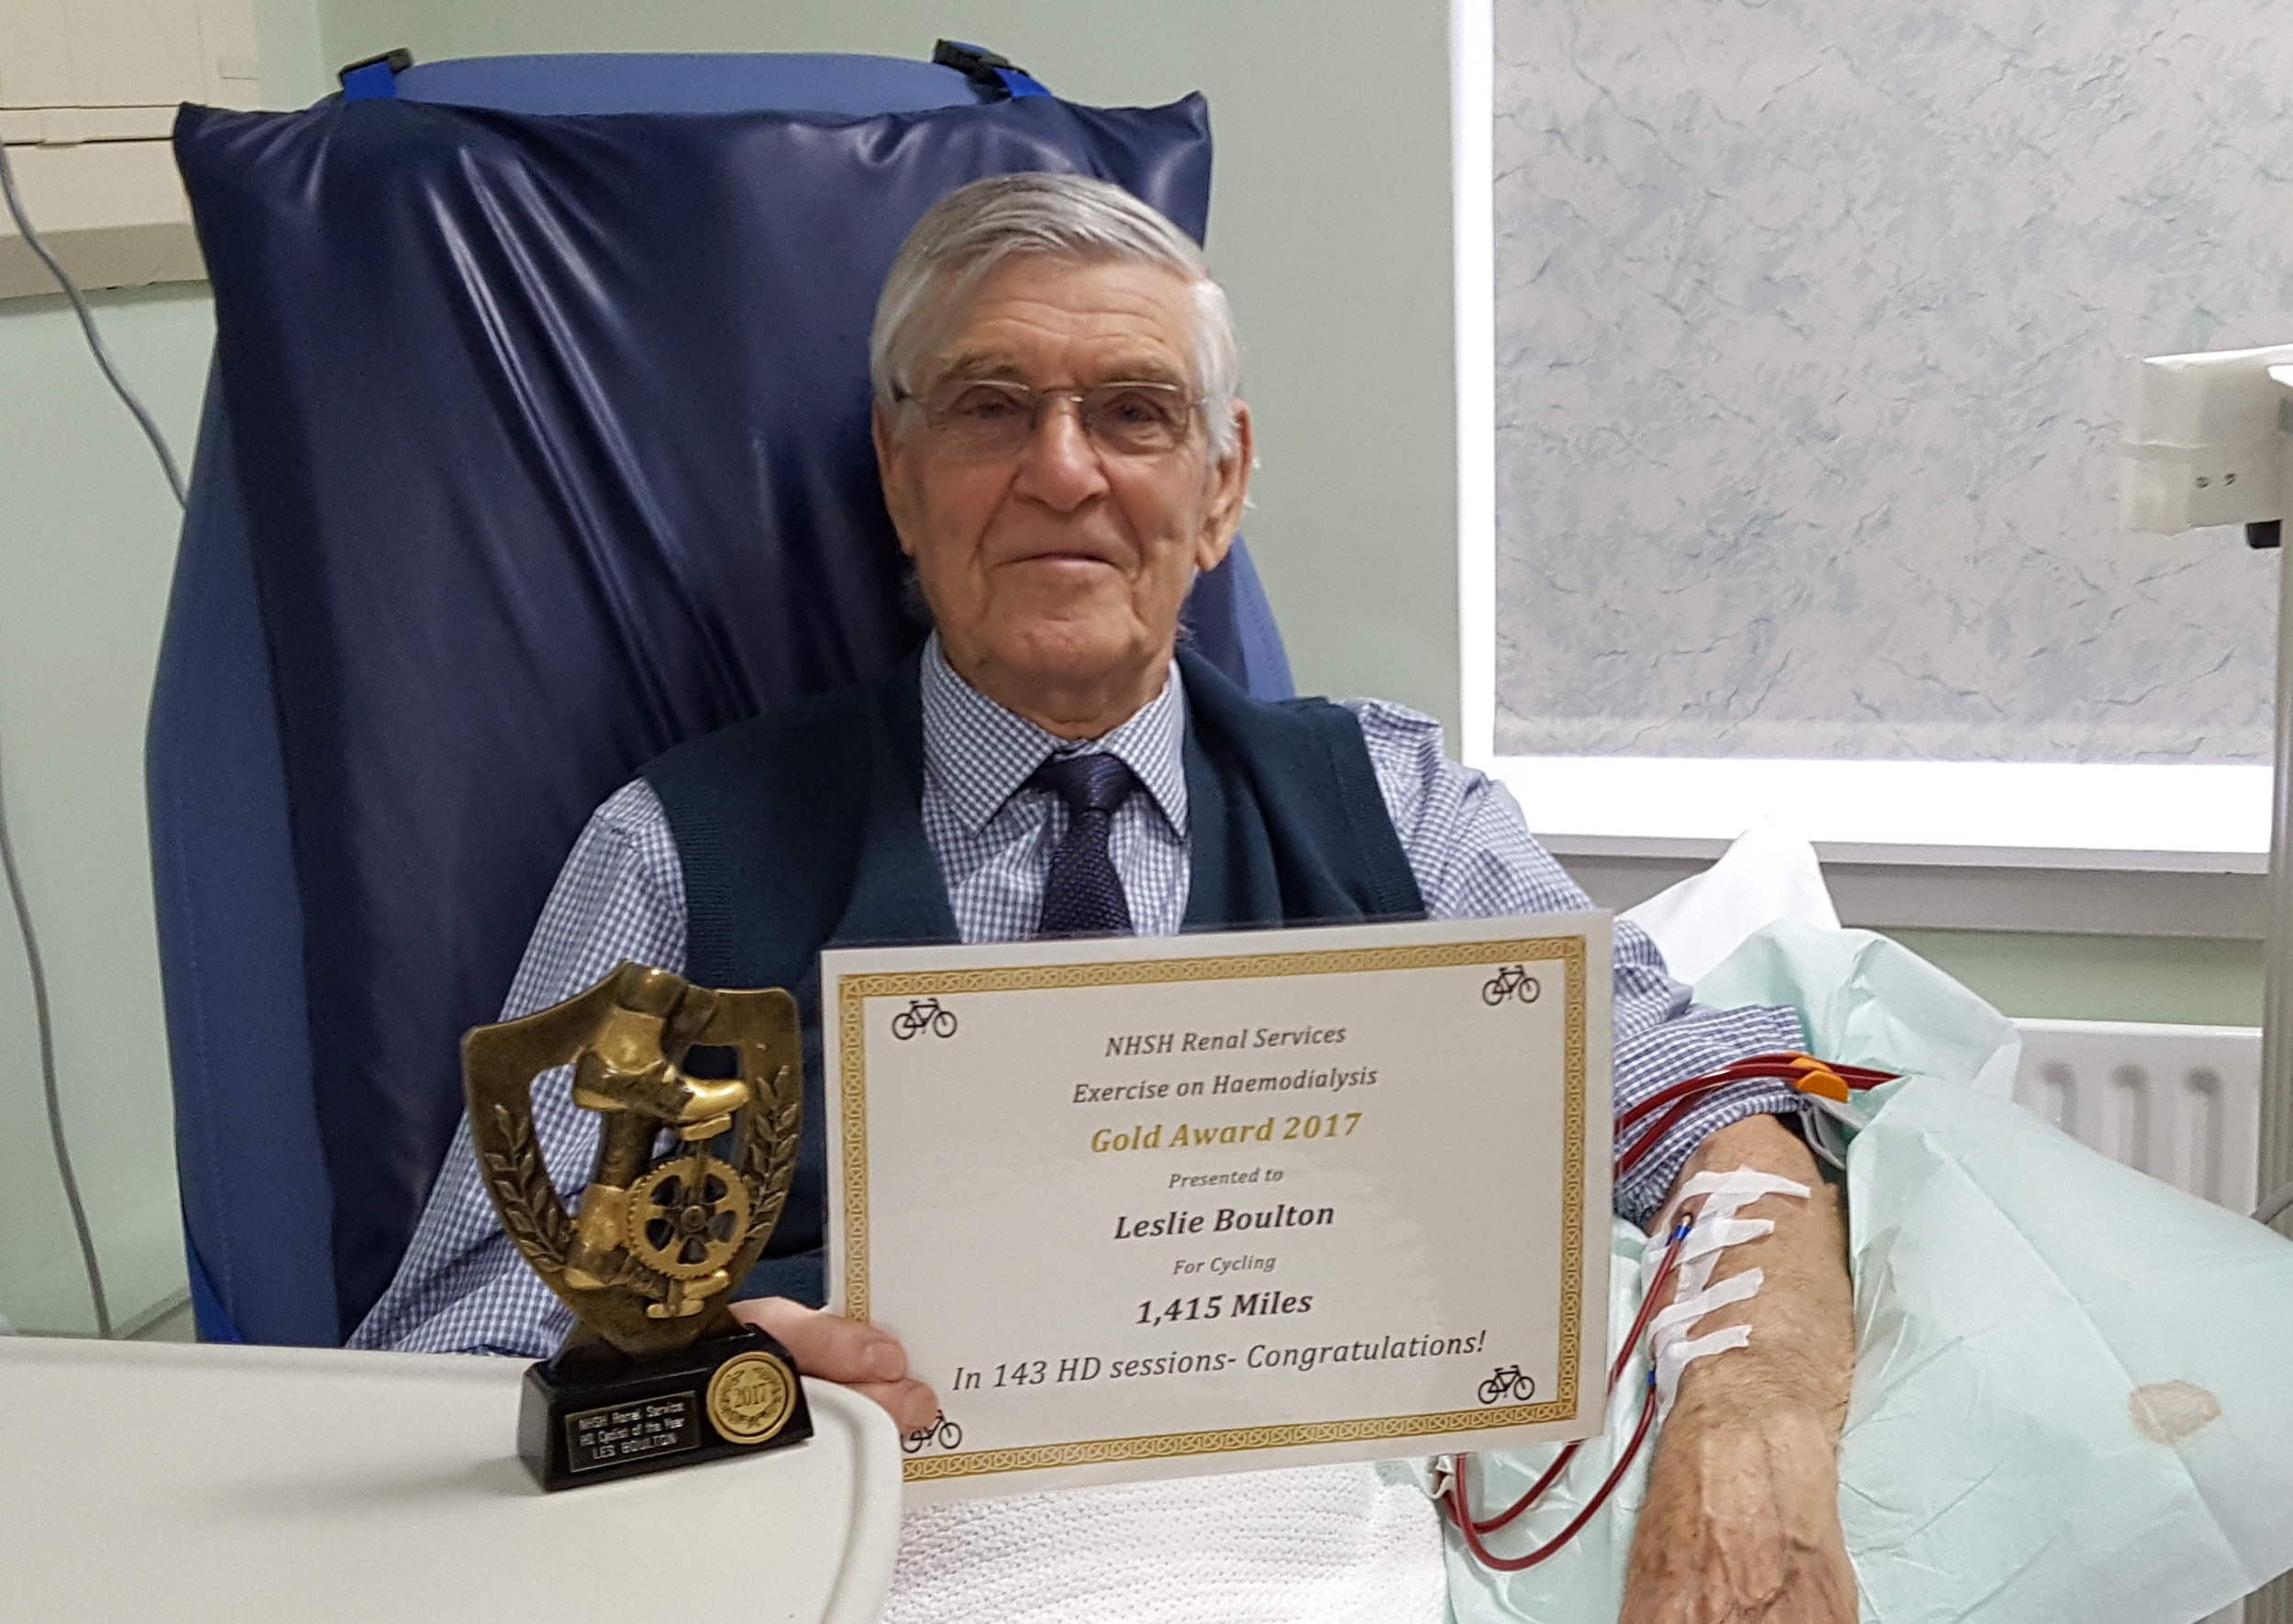 Les Boulton with his award and certificate